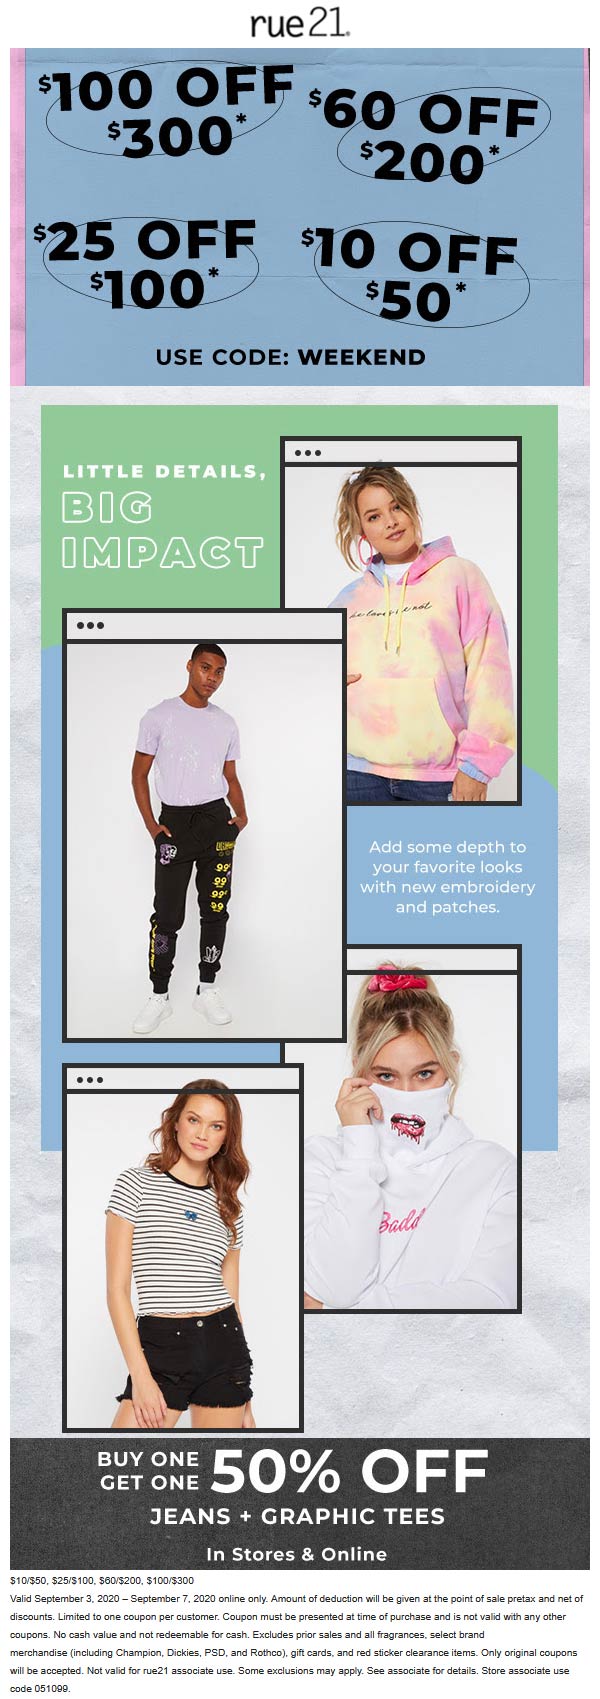 rue21 stores Coupon  $10 off $50 & more at rue21 via promo code WEEKEND #rue21 